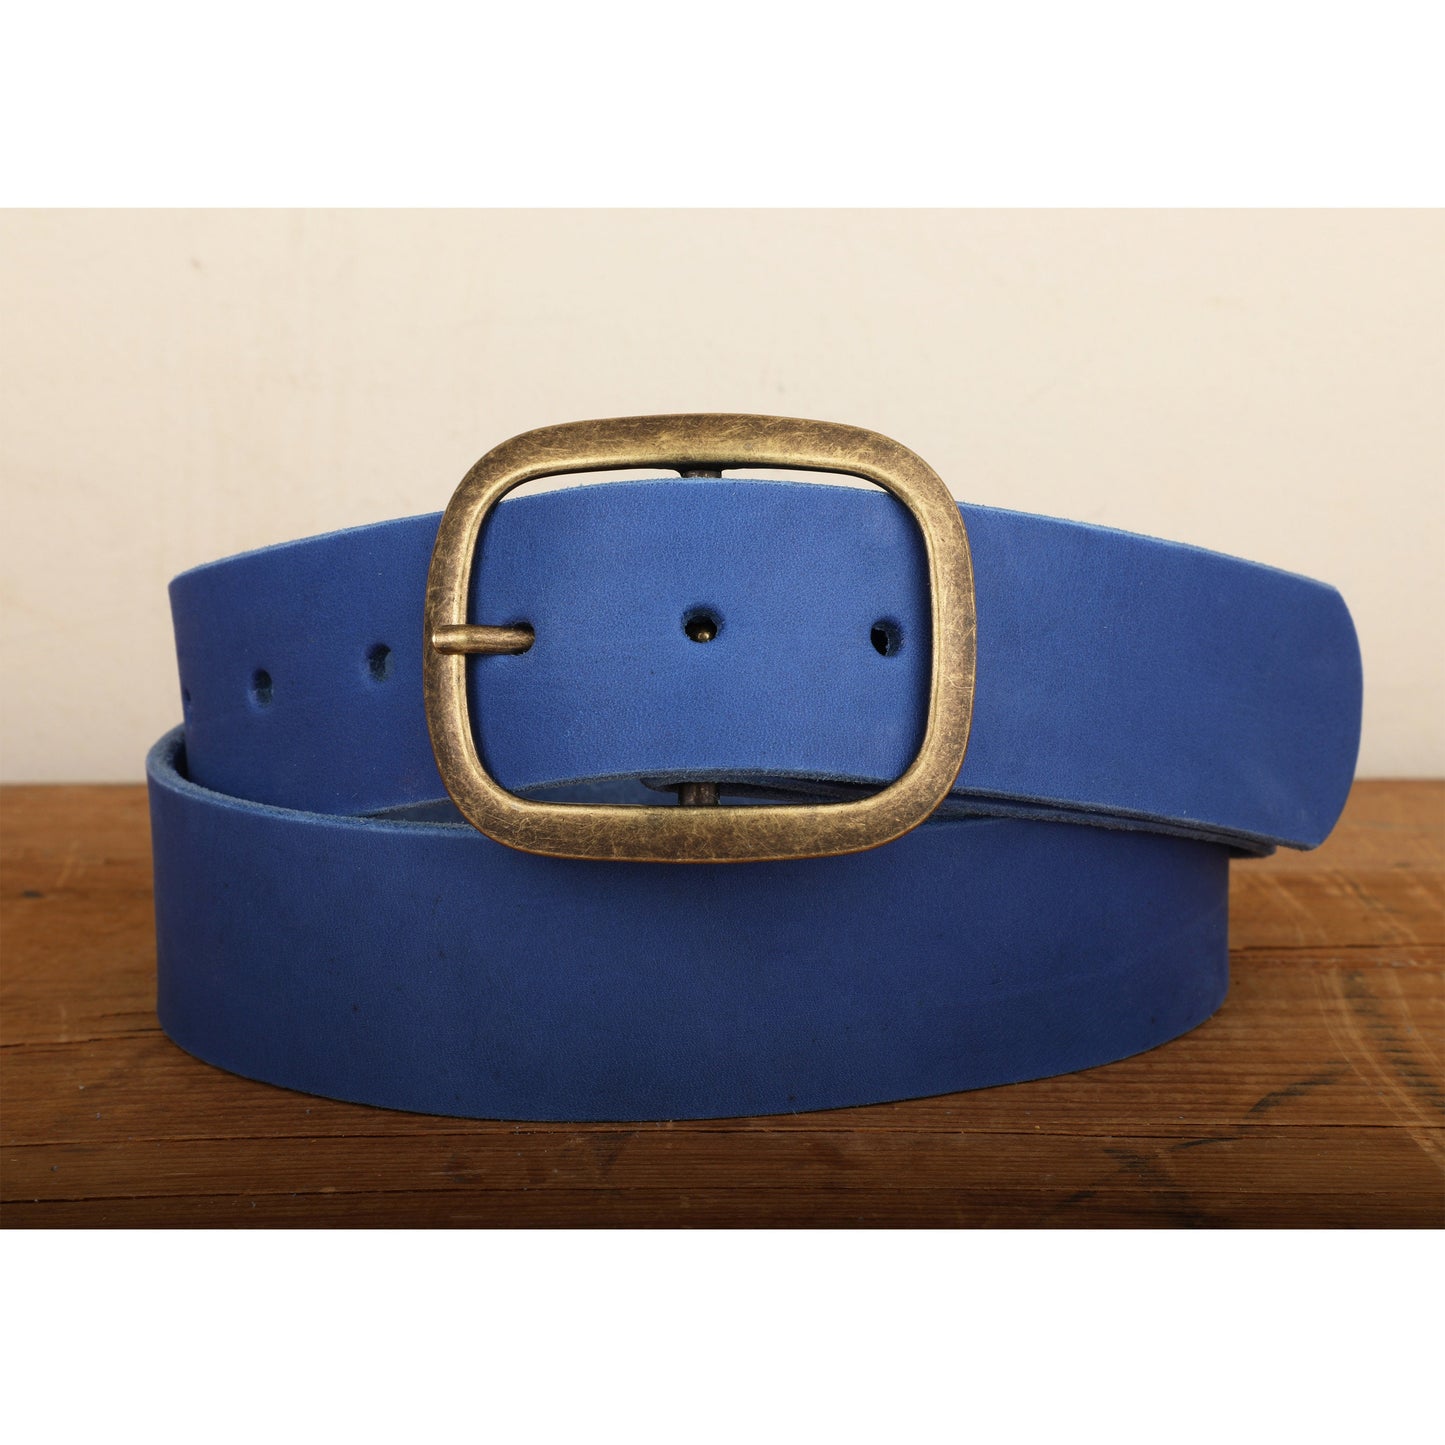 Electric Blue Wide Leather Snap Belt - Handmade in USA - Bold Bright Royal Blue Color Unisex with Gold Tone Antique Brass Belt Buckle